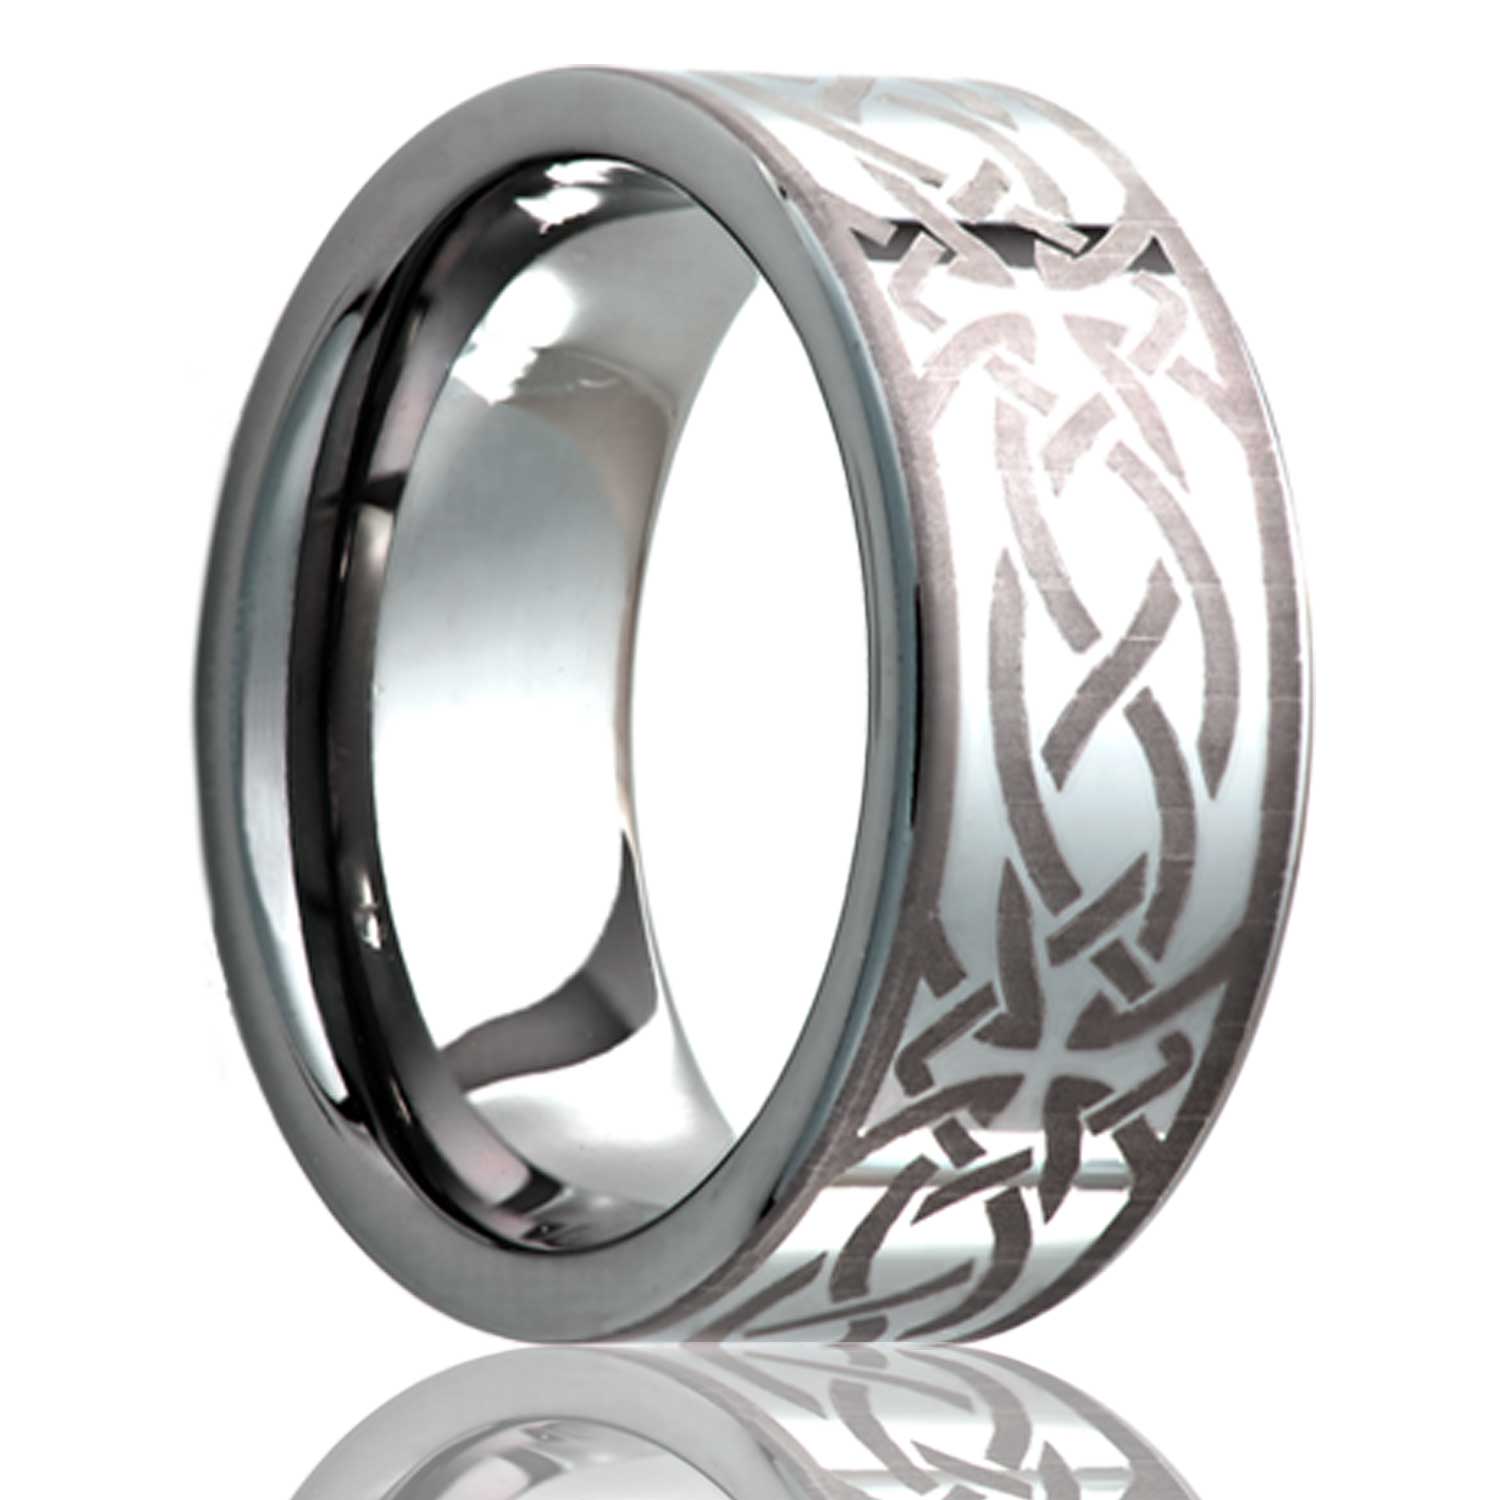 A celtic cross knot titanium wedding band displayed on a neutral white background.